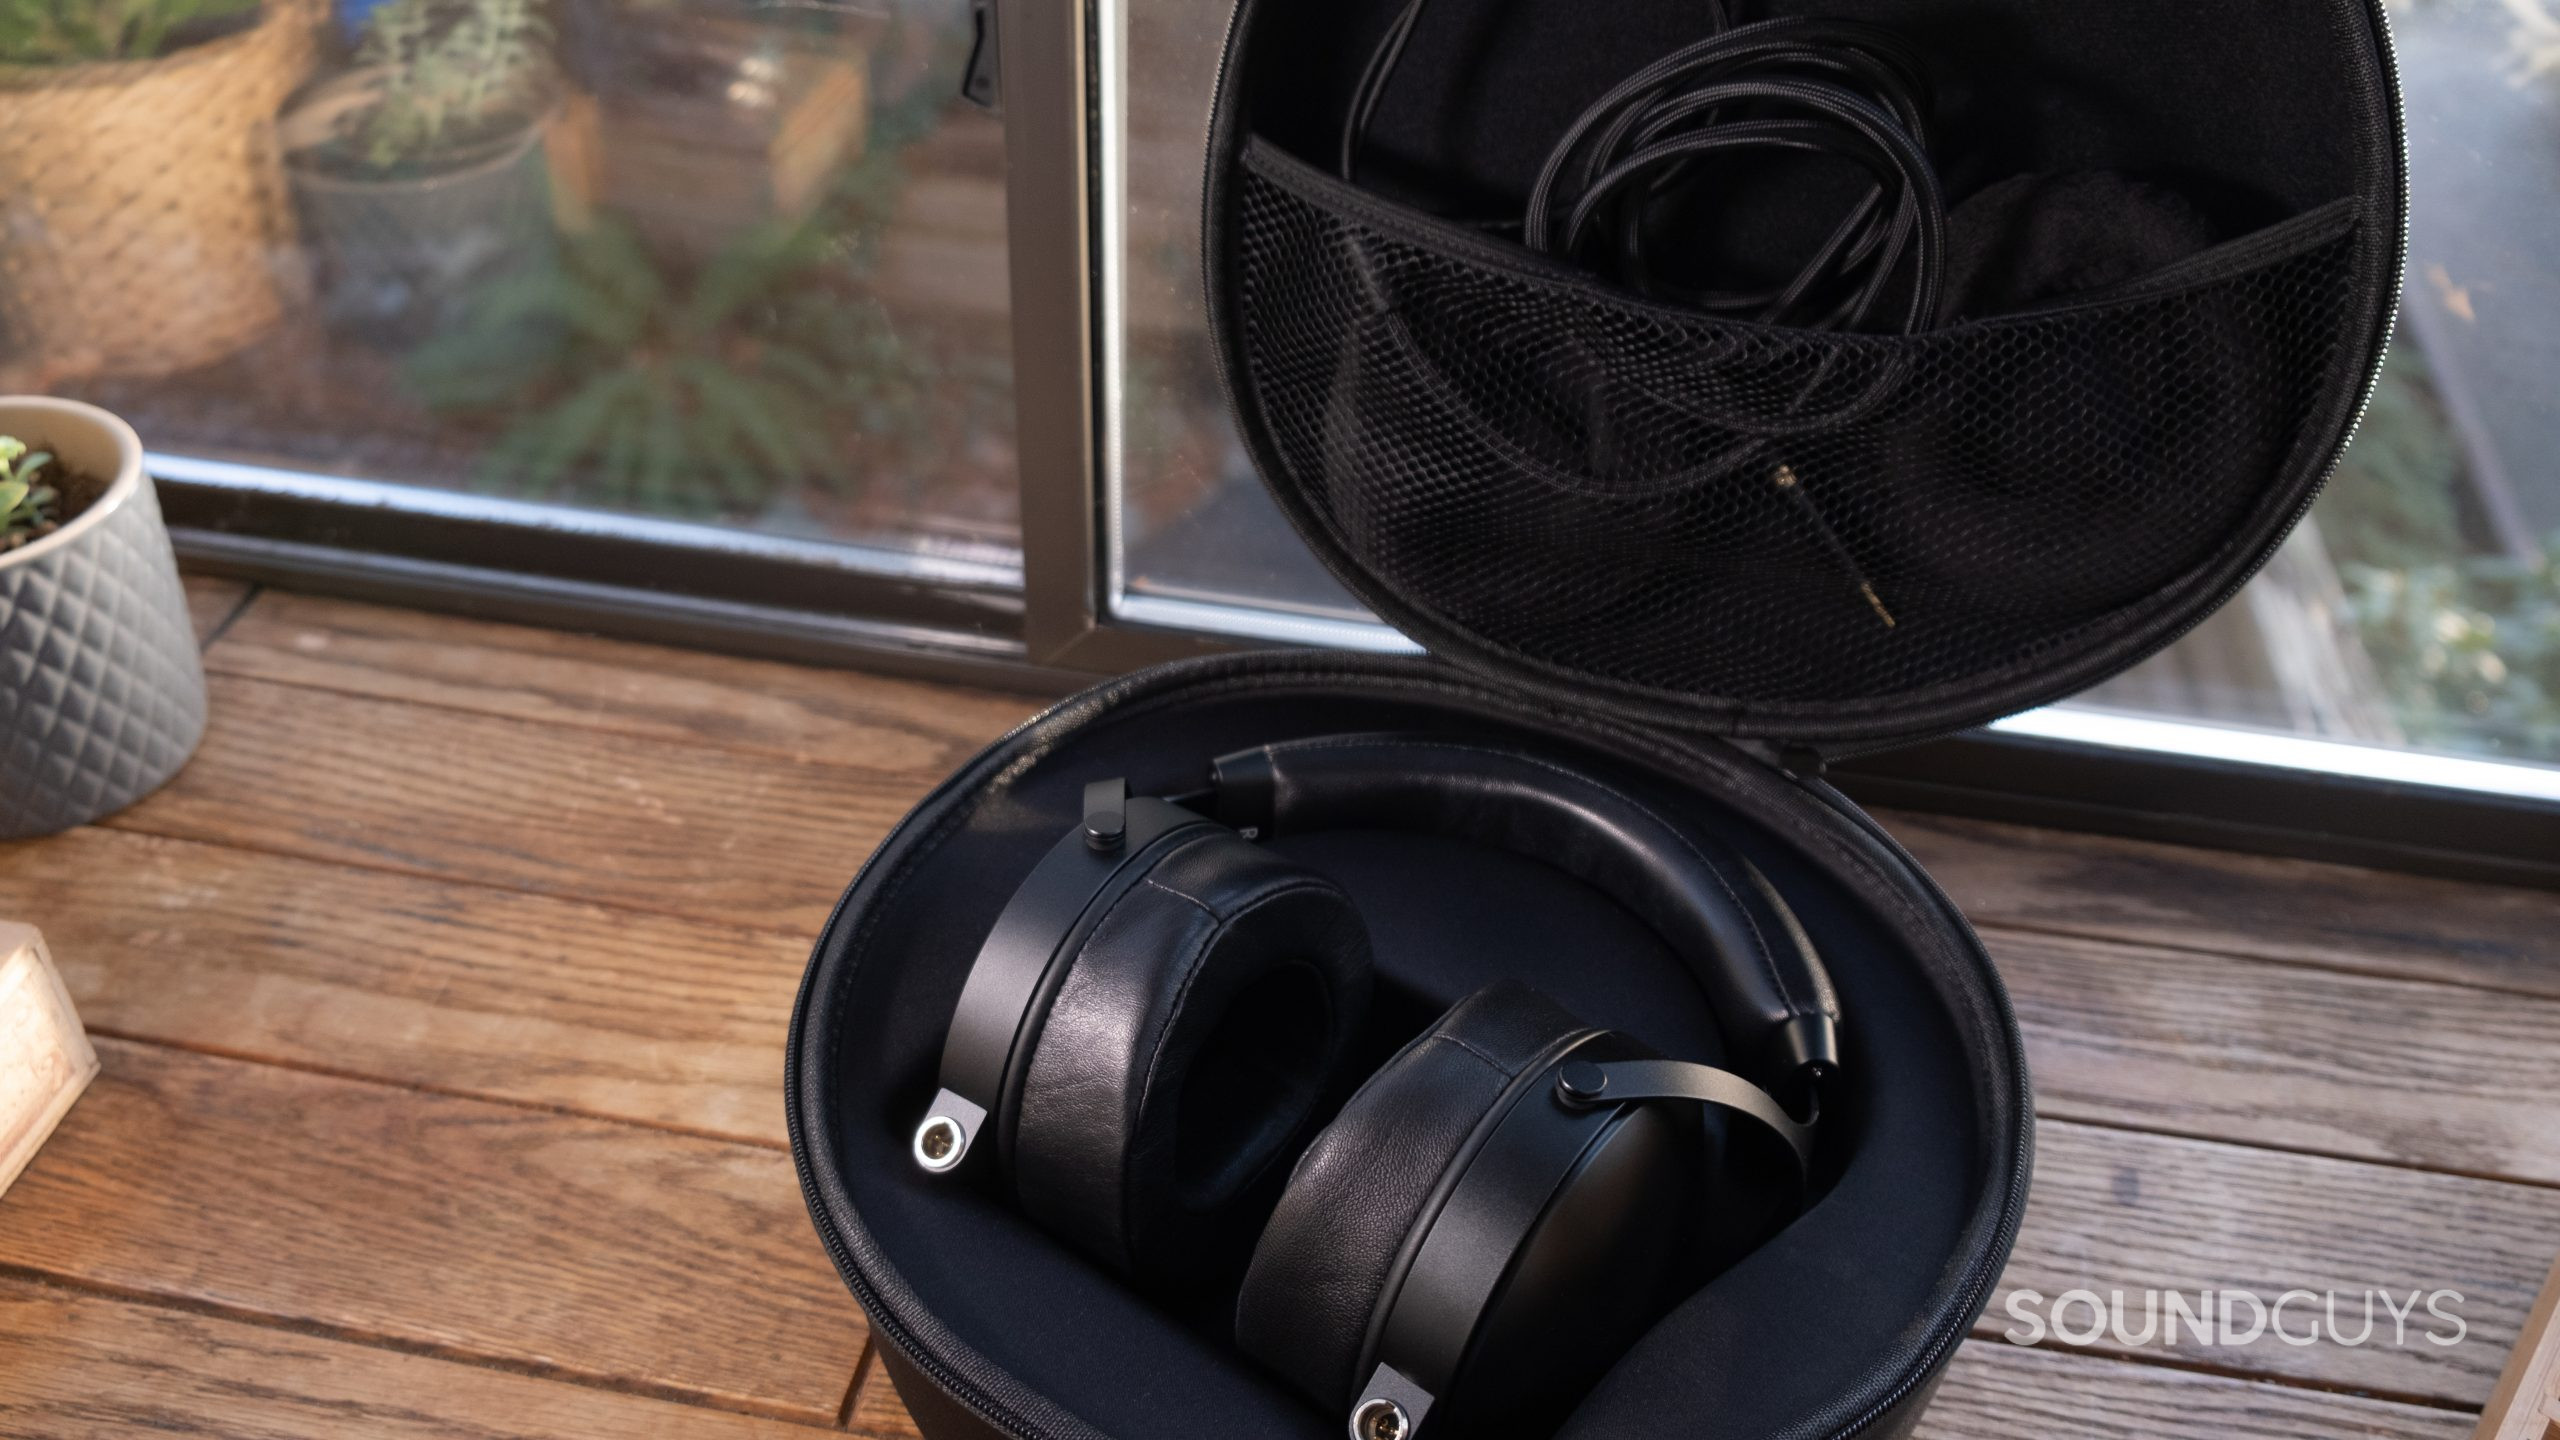 The Monolith by Monoprice M1570C rests in the molded case with the lid open showing the accessories in the inner pocket.